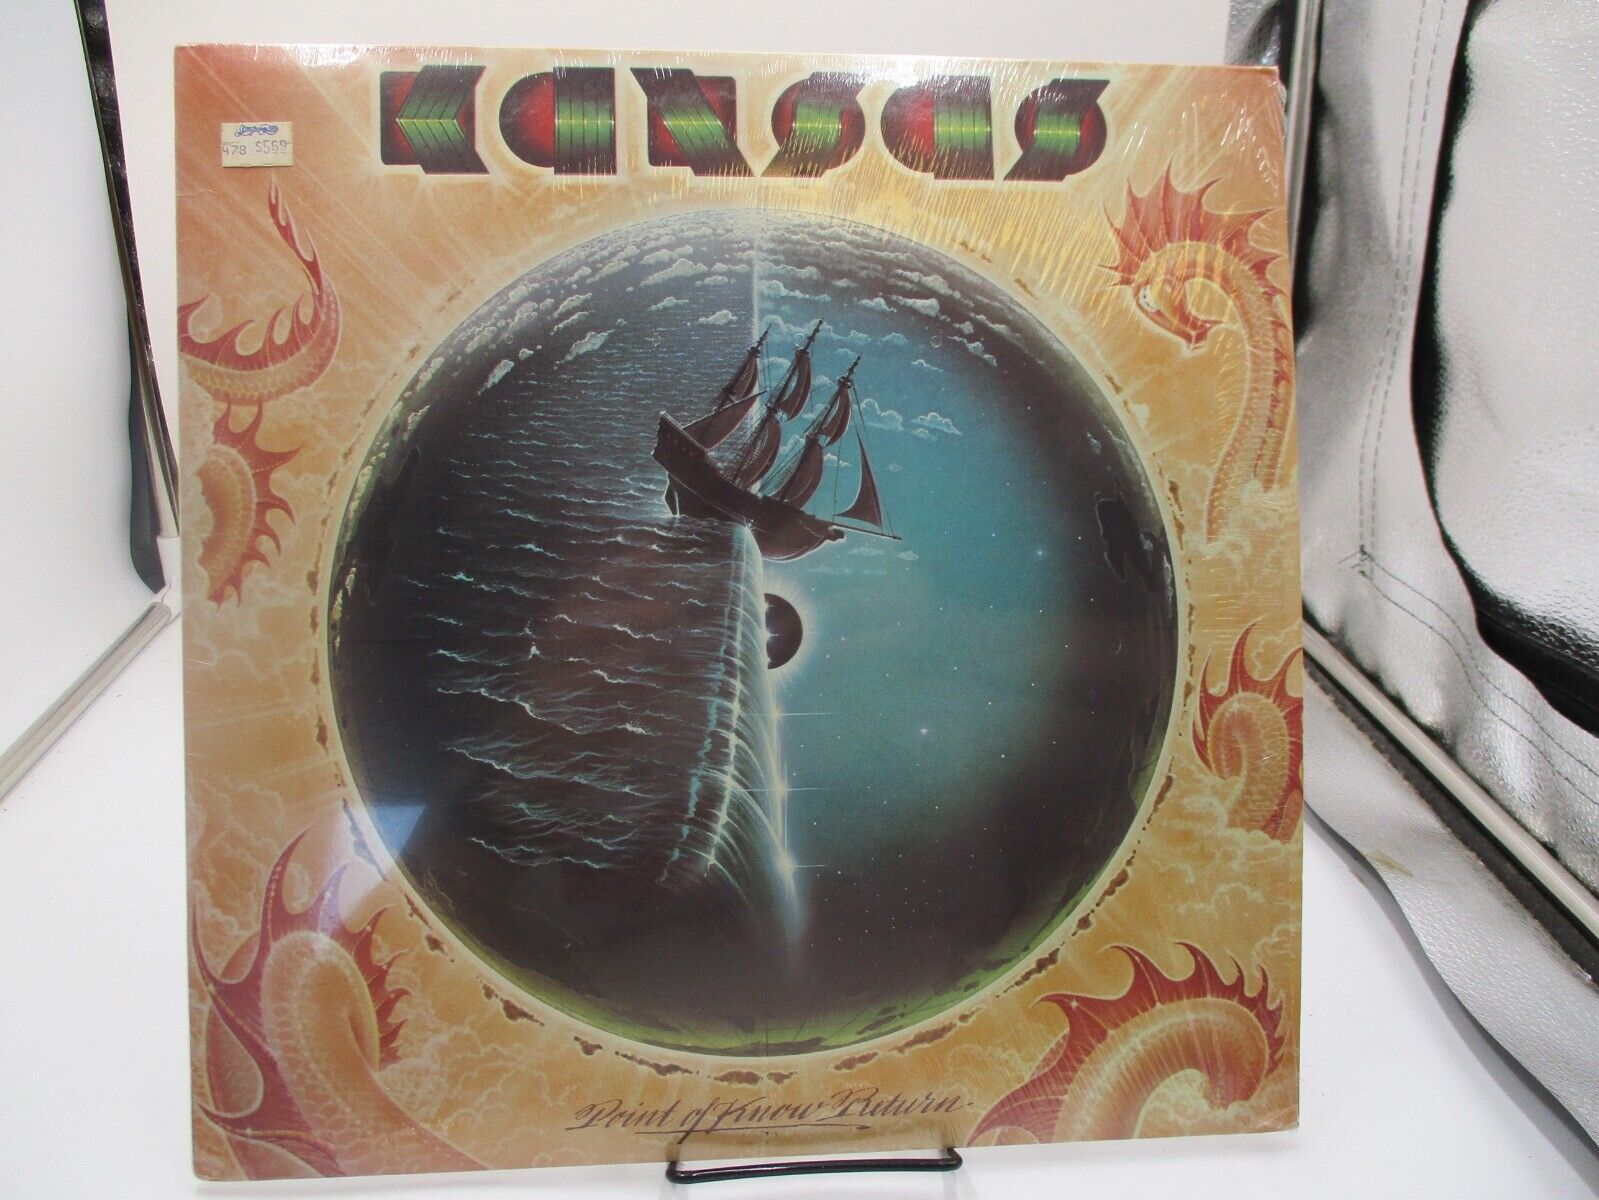 KANSAS "Point of Know Return" LP Record Ultrasonic Clean 1977 Shrink Sterling EX